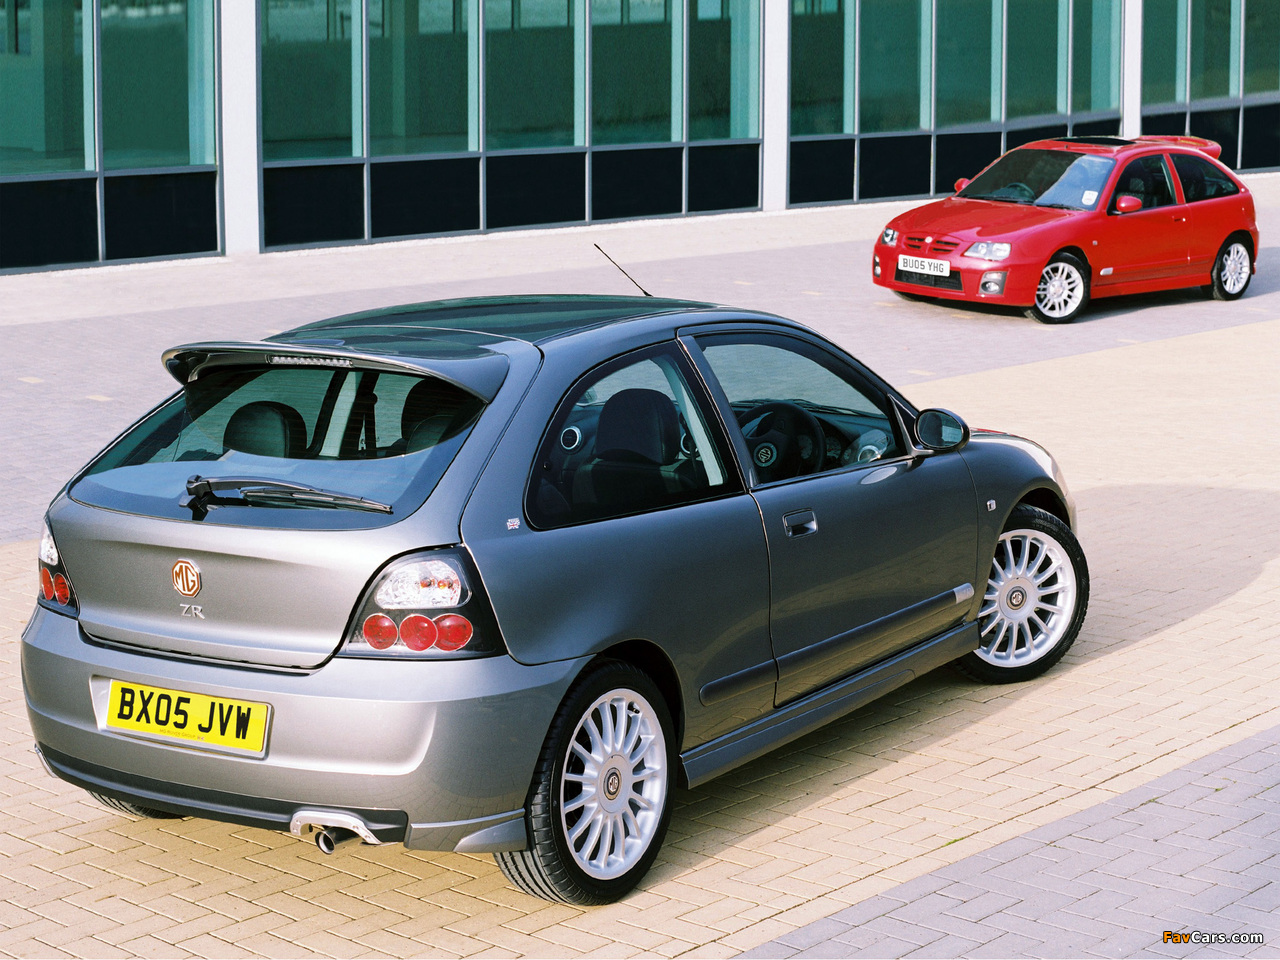 Images of MG ZR (1280 x 960)